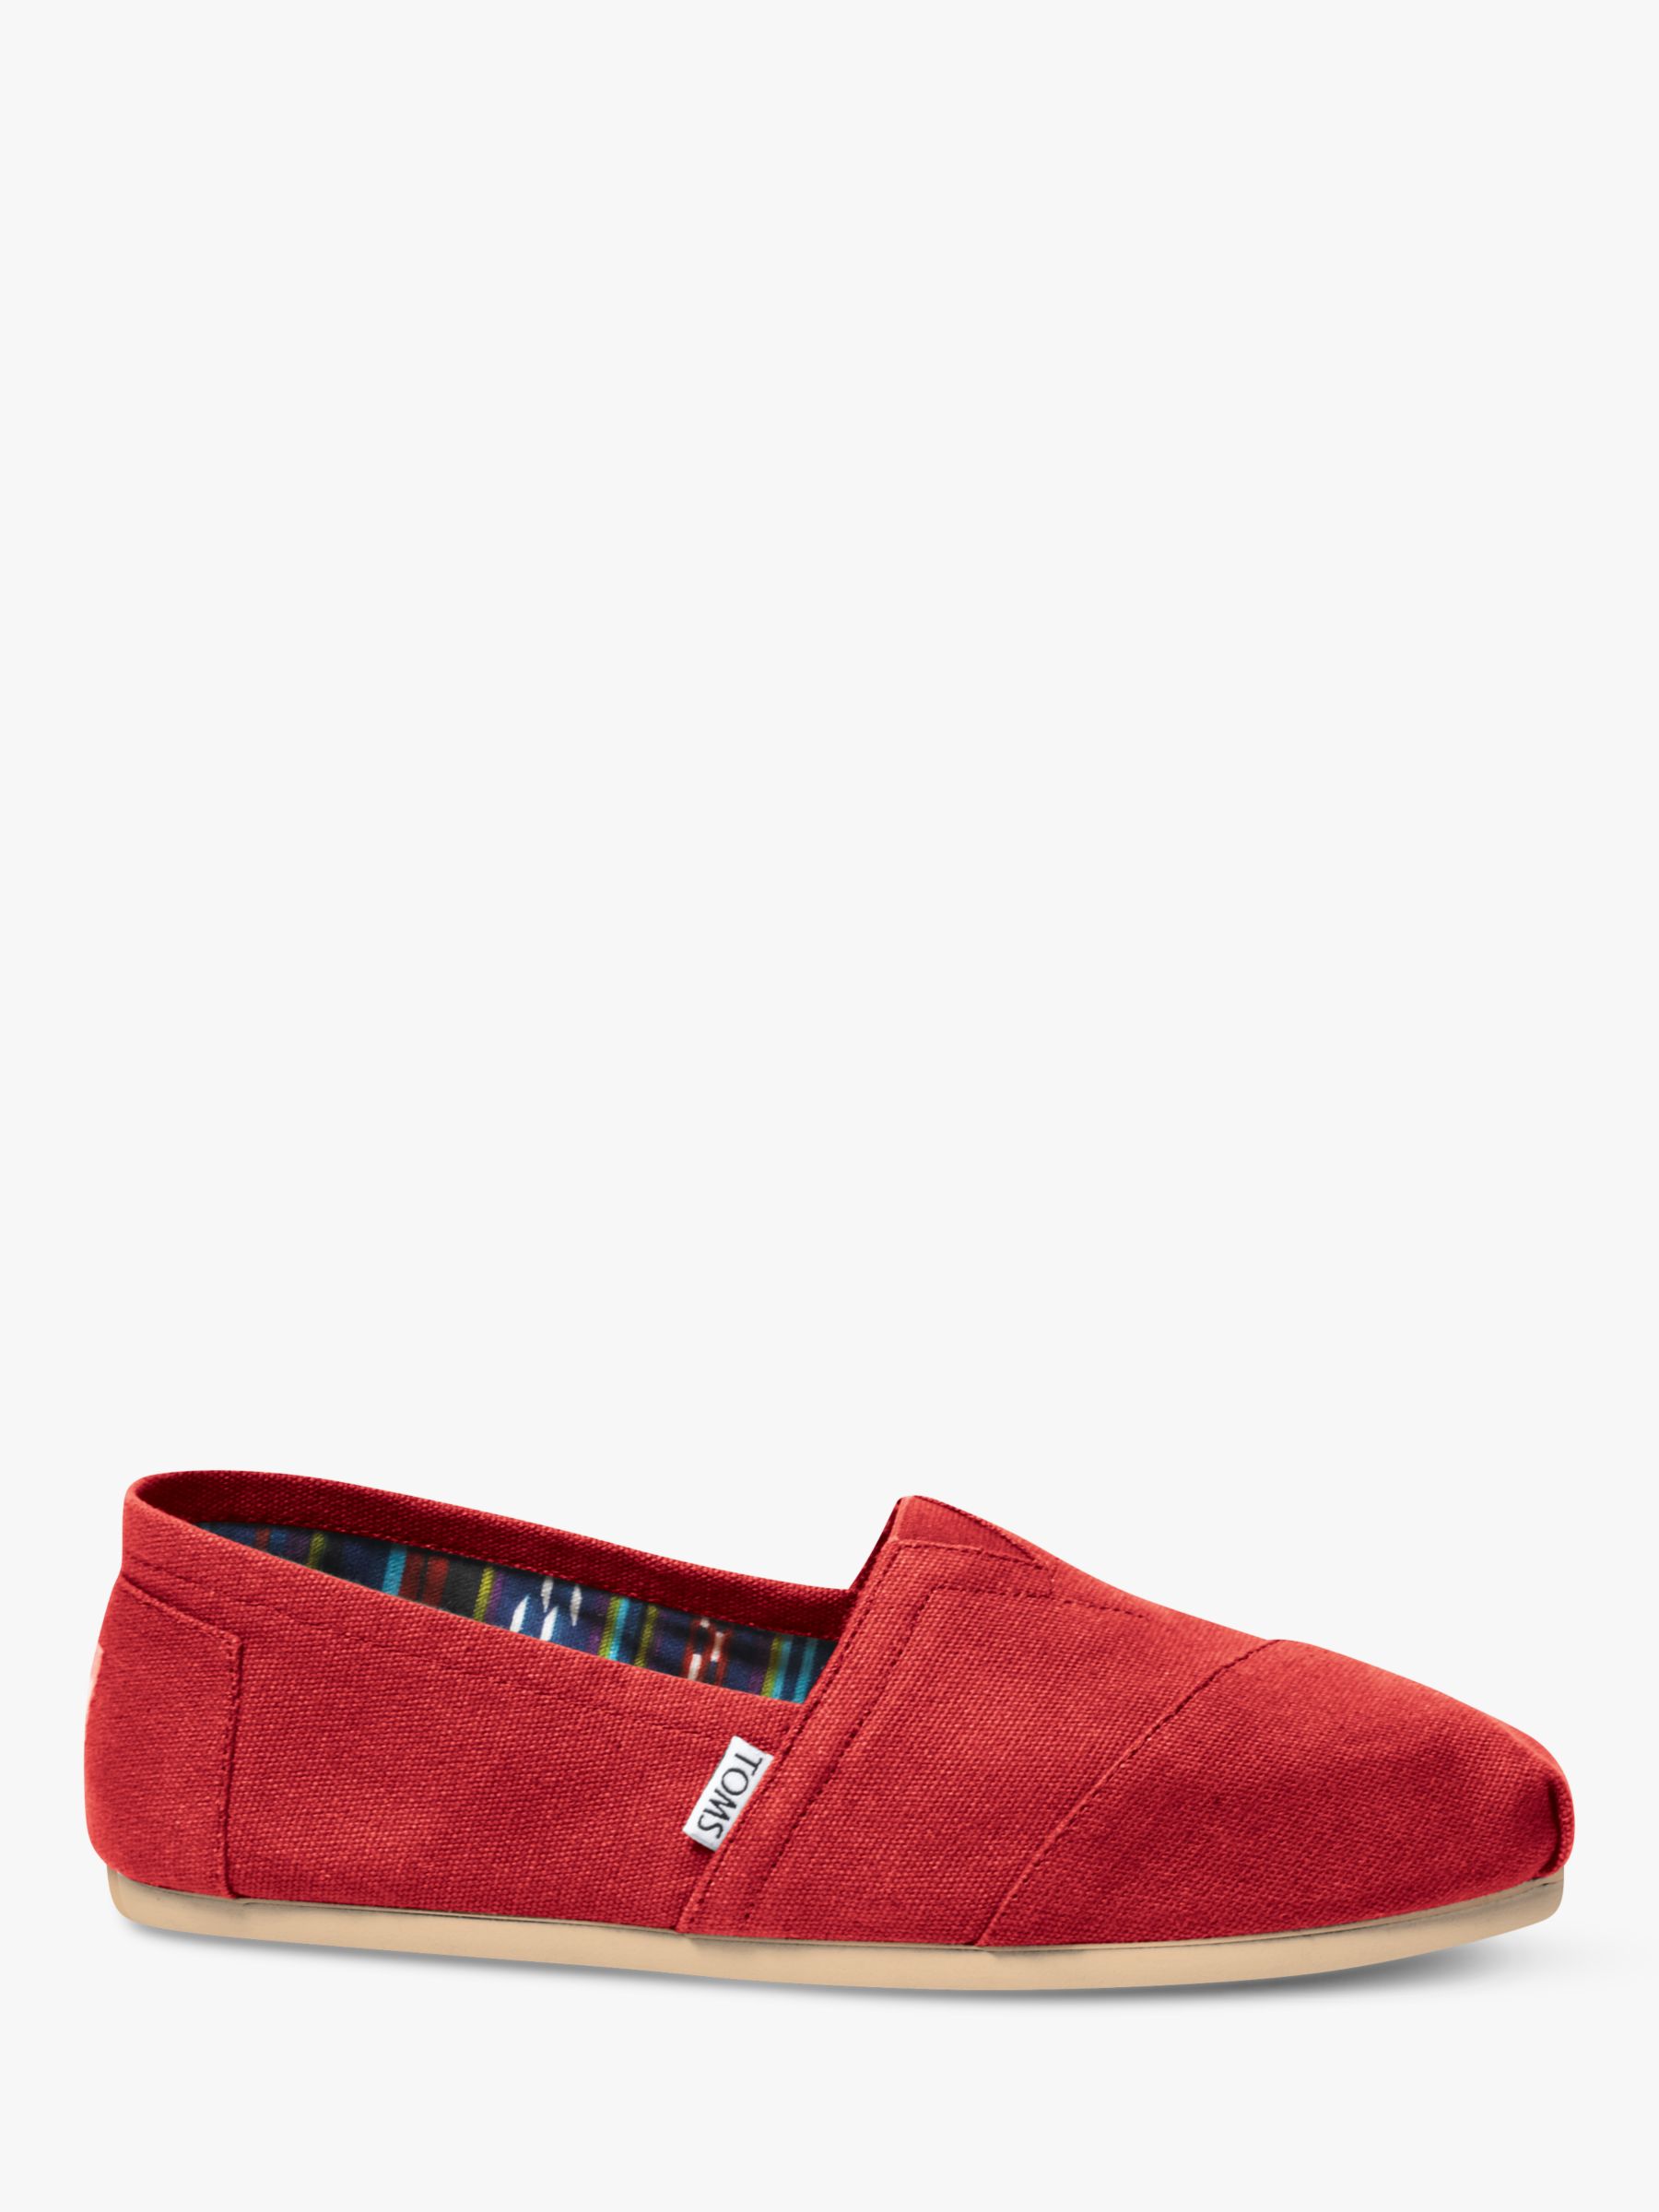 TOMS Classic Canvas Espadrilles, Red at John Lewis & Partners